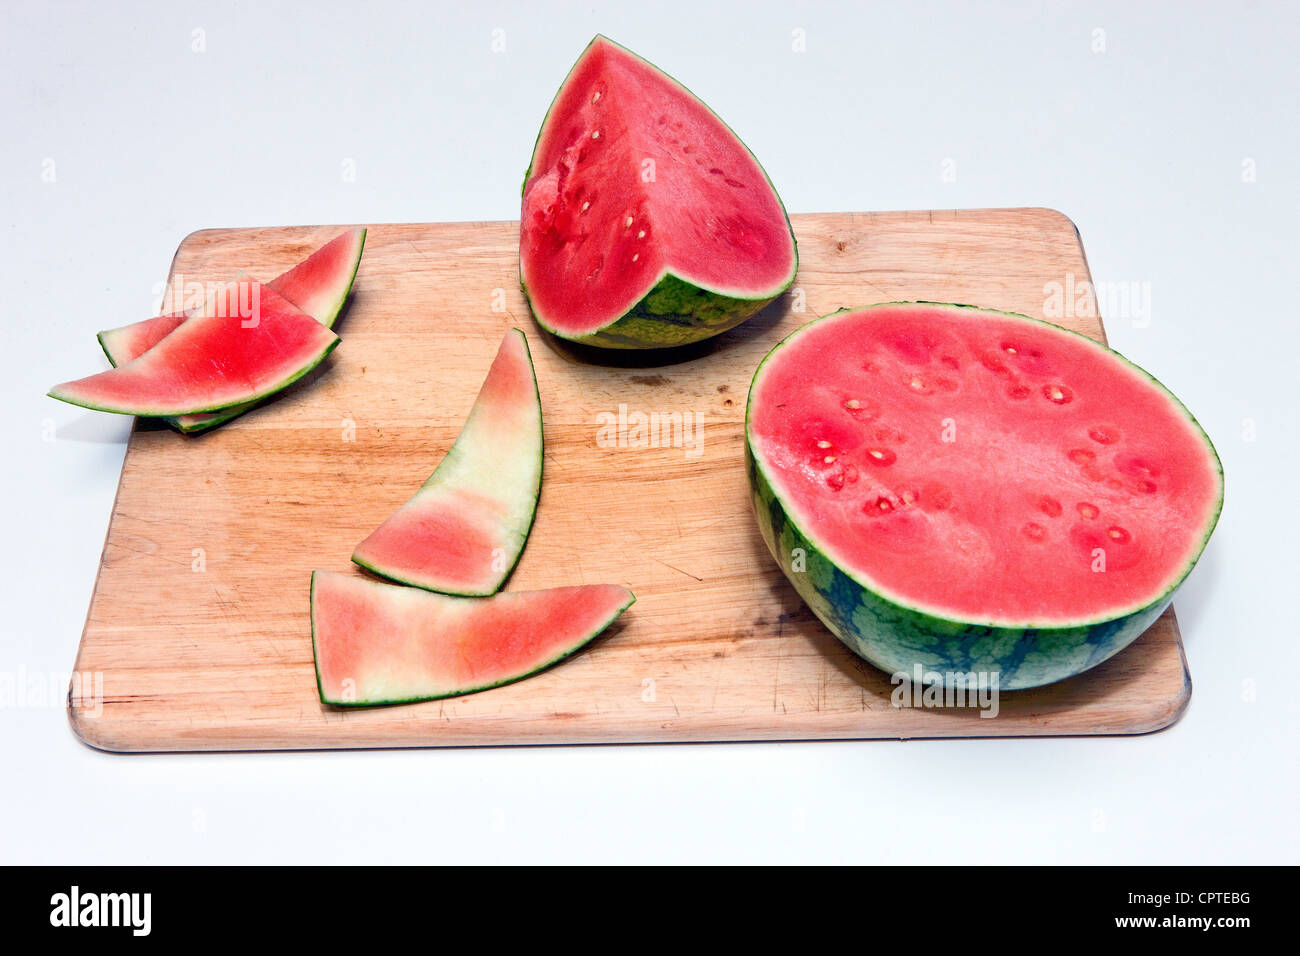 Slices of ripe watermelon on cutting board Stock Photo